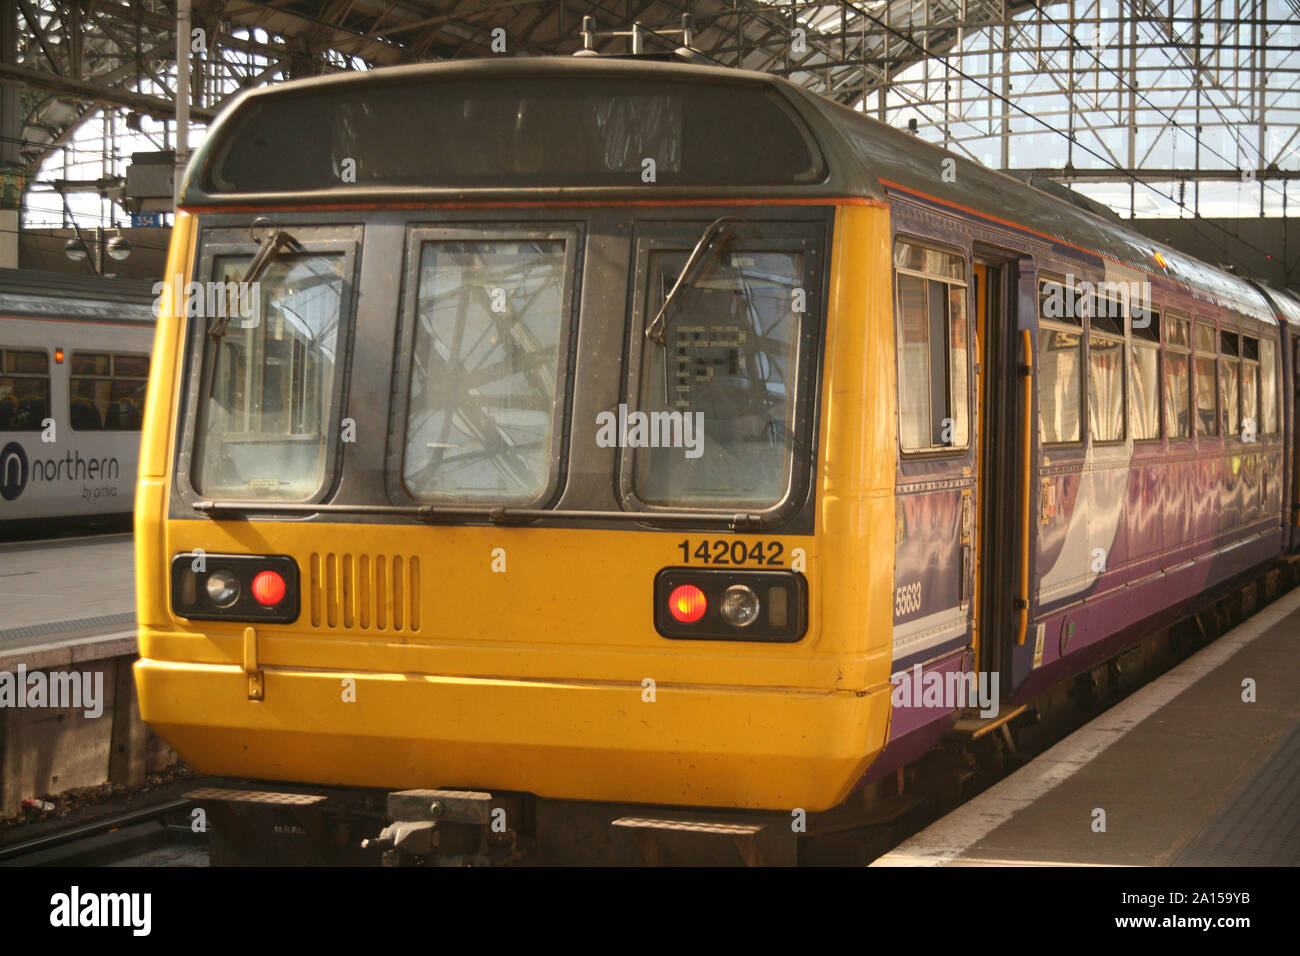 Manchester. UK 19 September, 2019. Manchester. UK 19 September, 2019.  A Pacer train stabled at Manchester Piccadilly Station.  The units will shortly Stock Photo